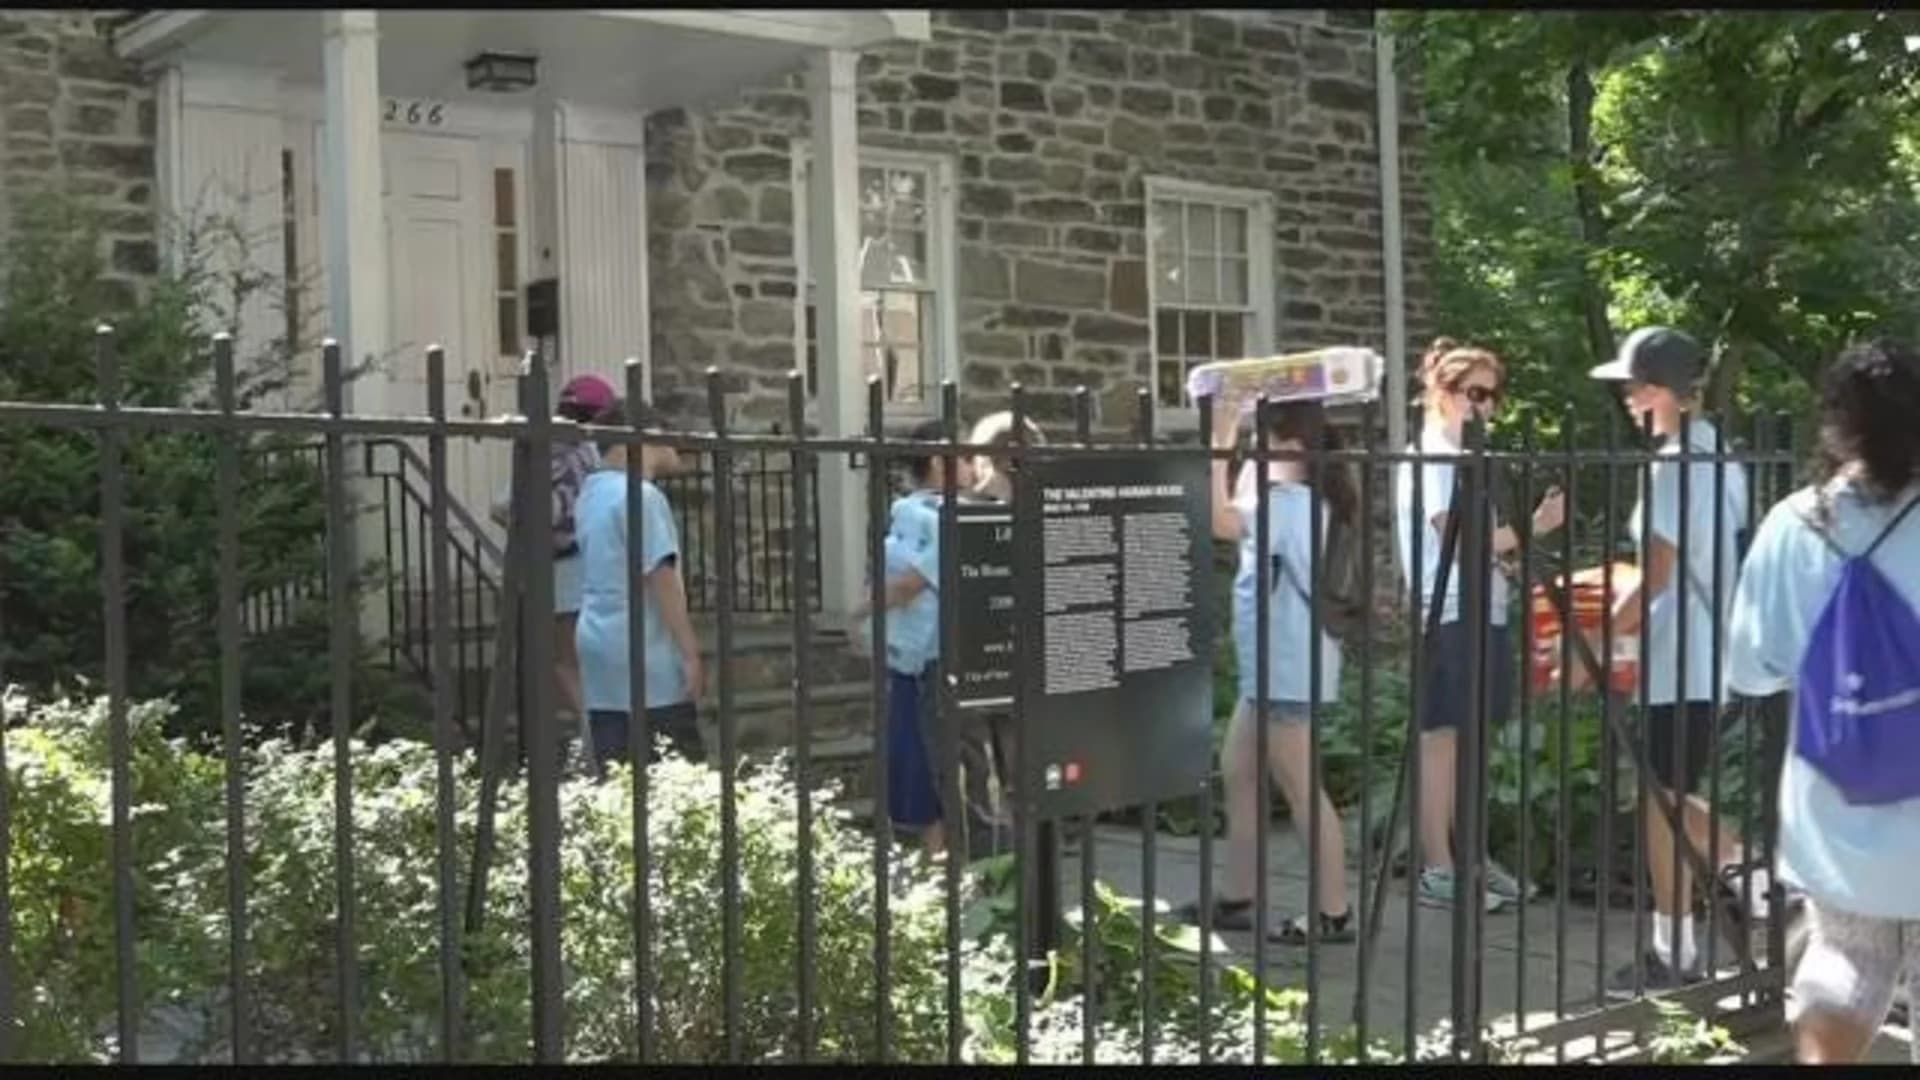 Bronx Historical Society transports kids to the 1700s